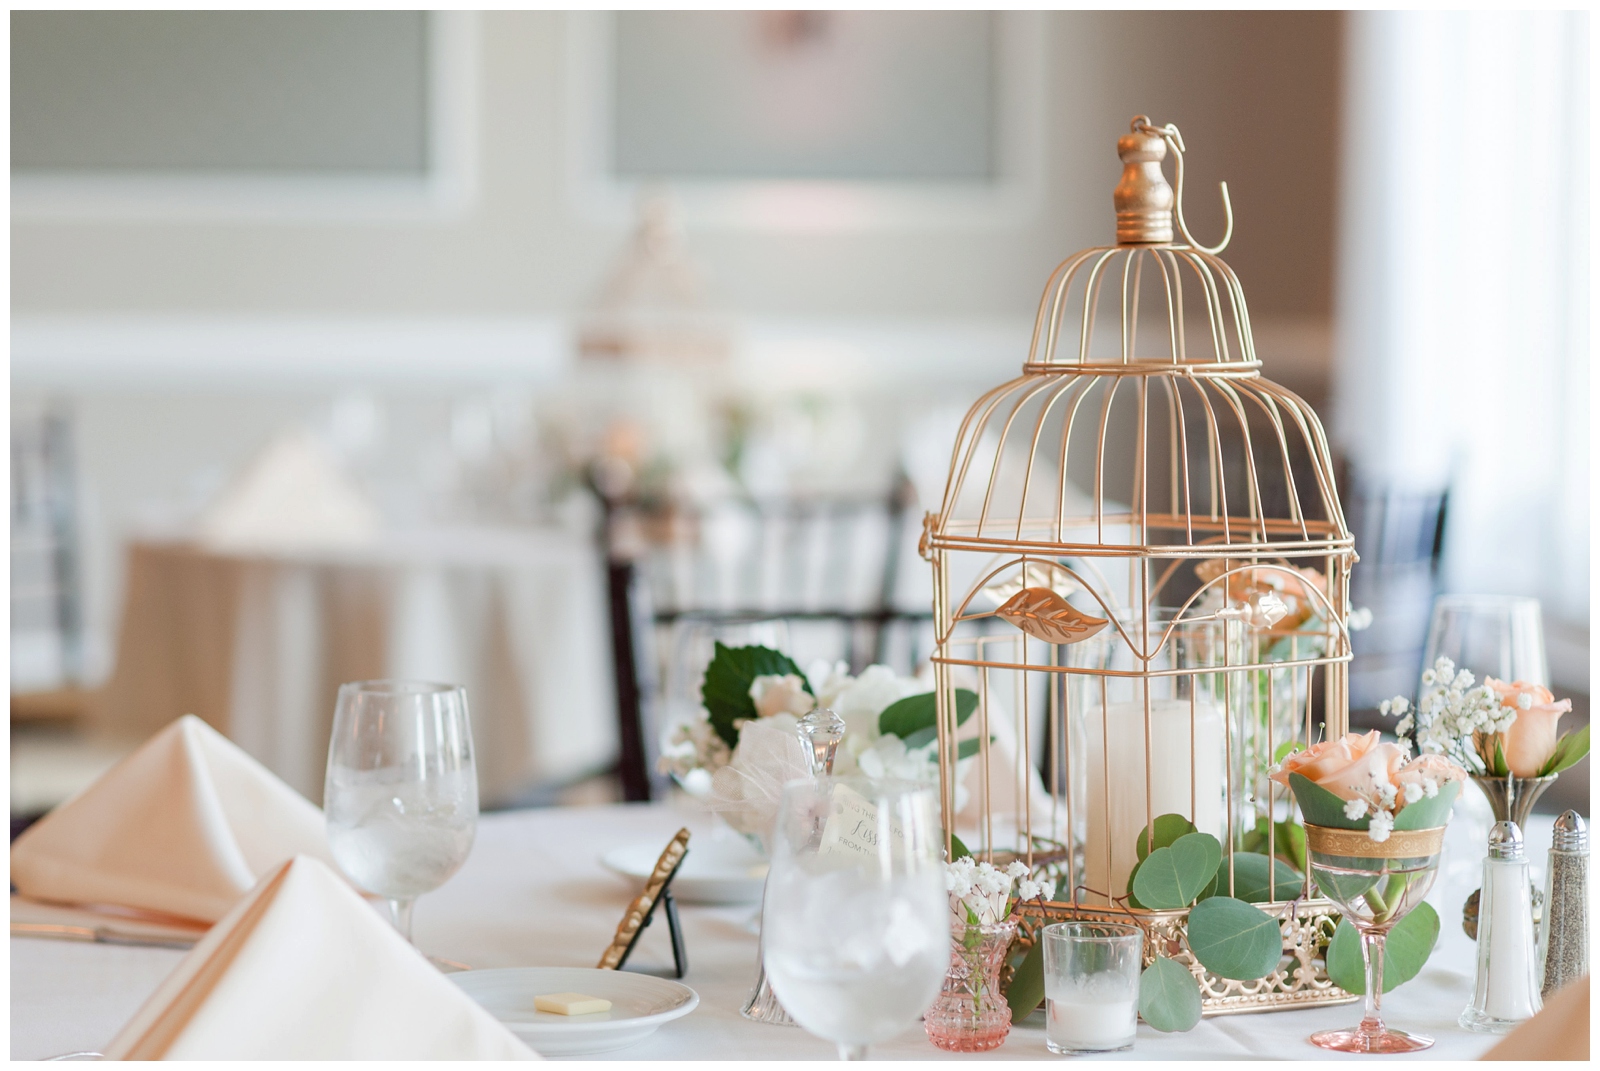 Birdcage wedding table decoration at wedgewood golf and country club reception room 